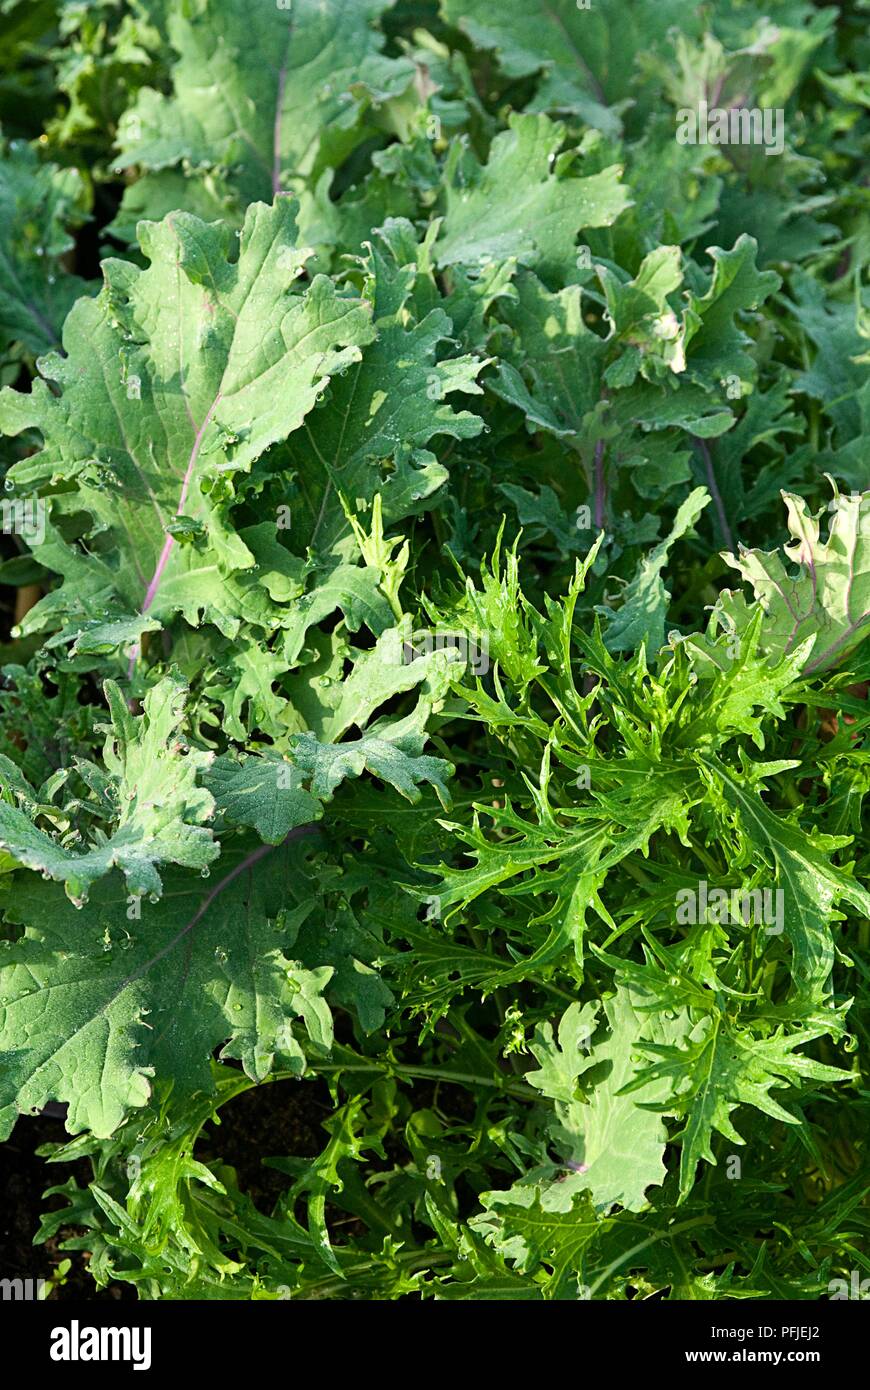 Mizuna and Kale 'Red Russian' leaves, close-up Stock Photo